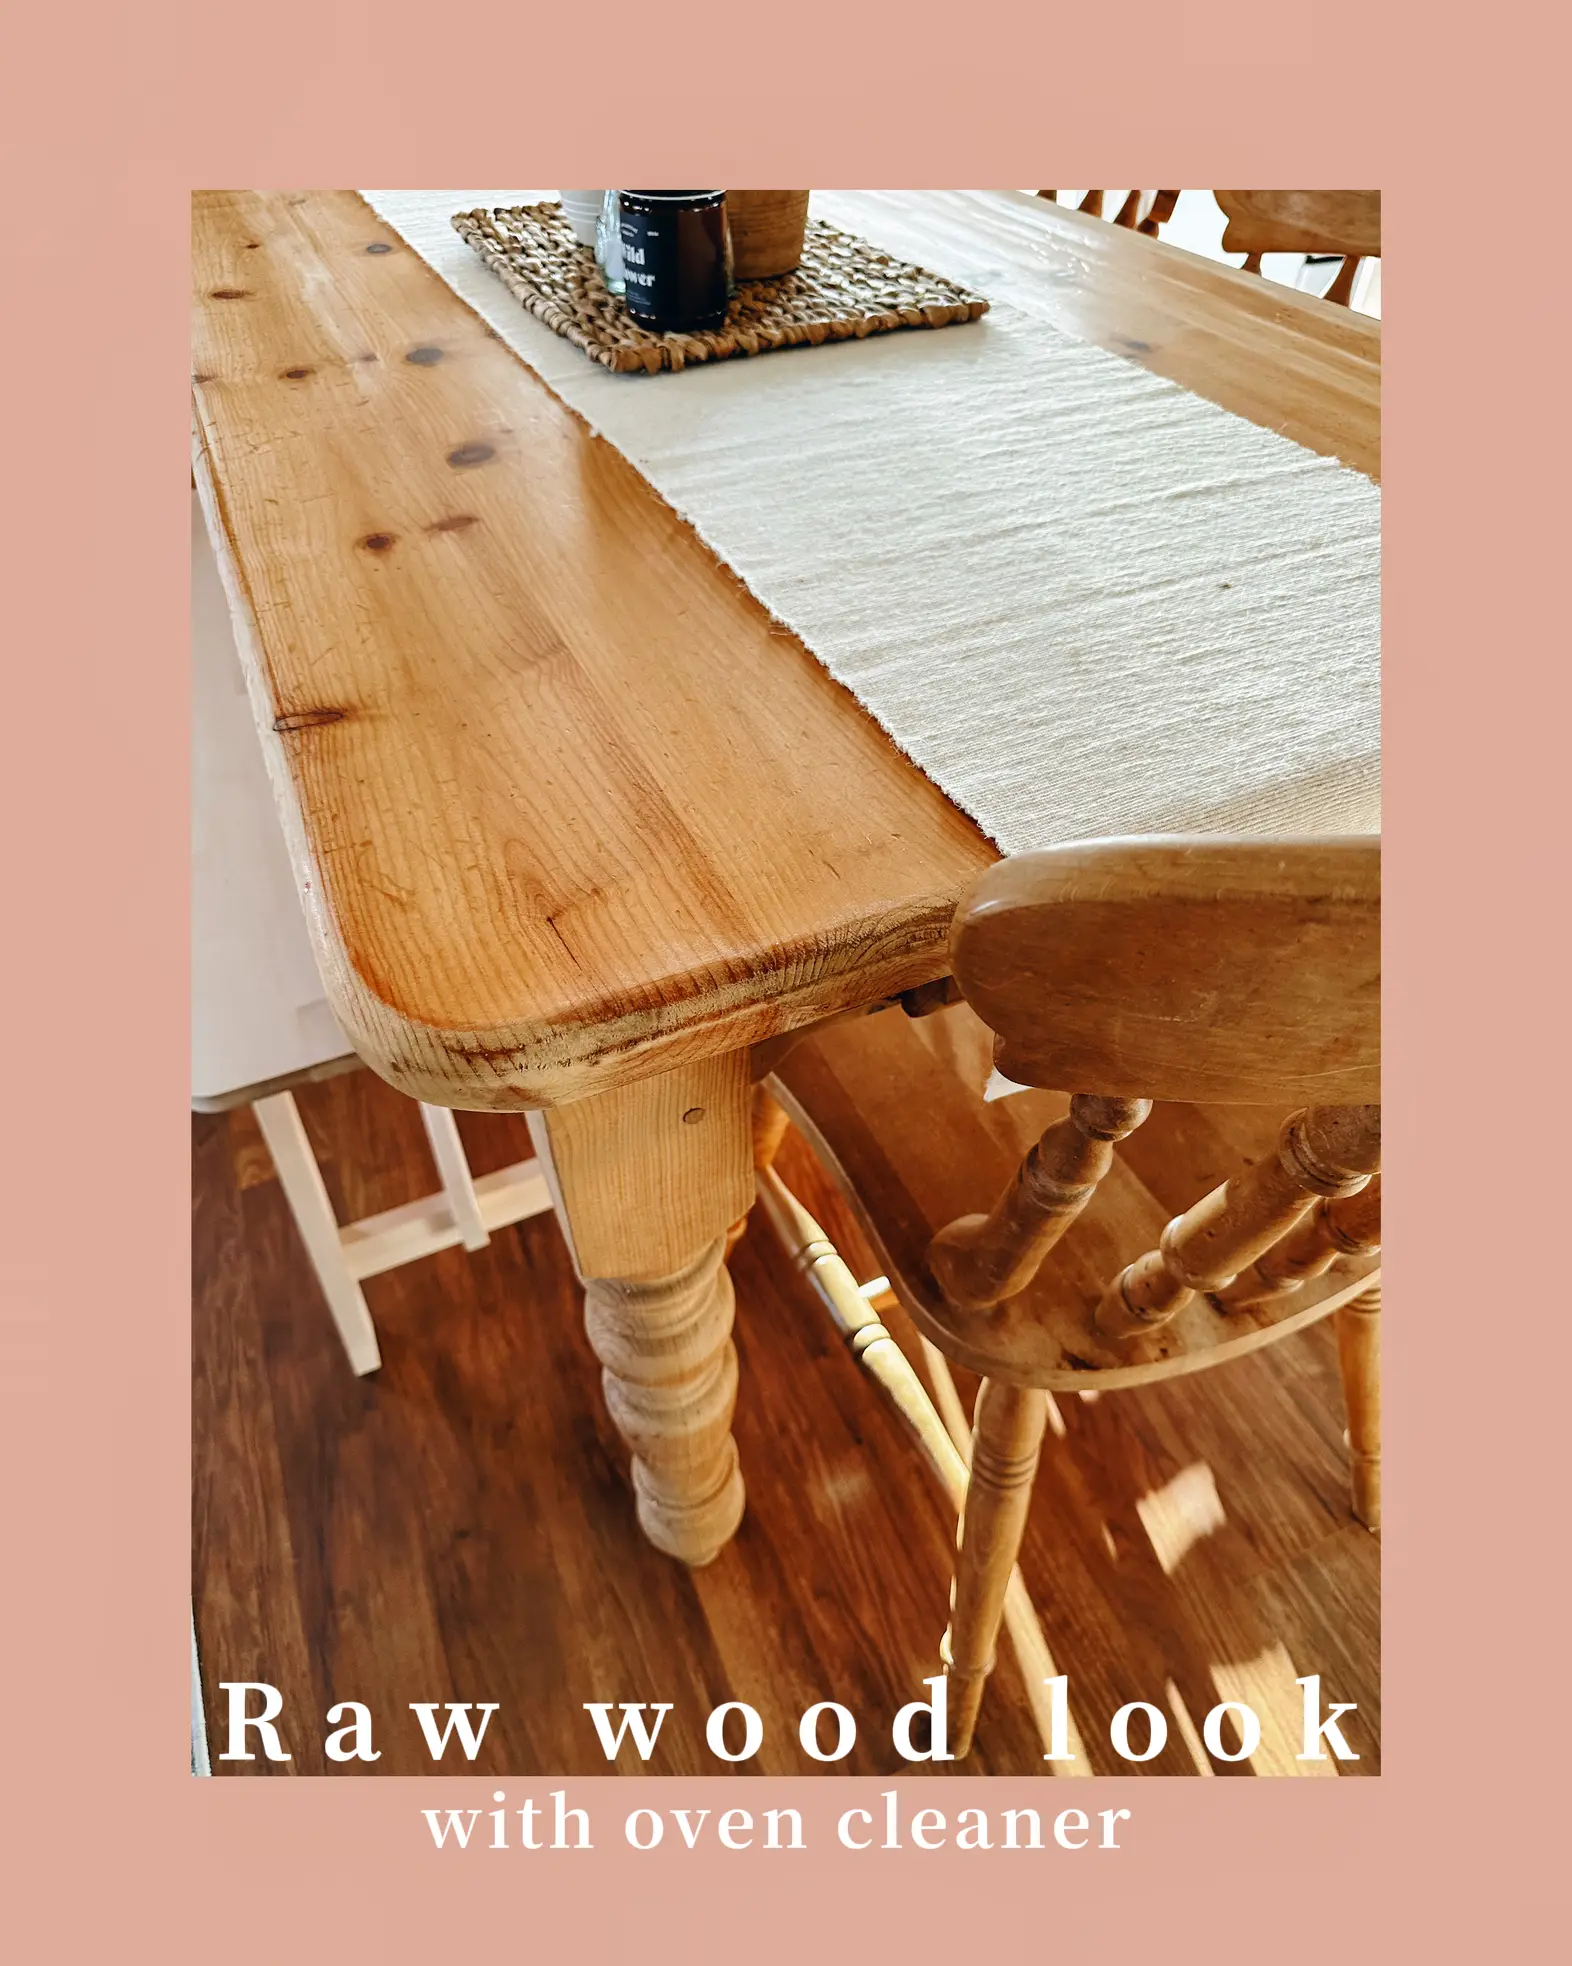 Products for easy DIY furniture restoration